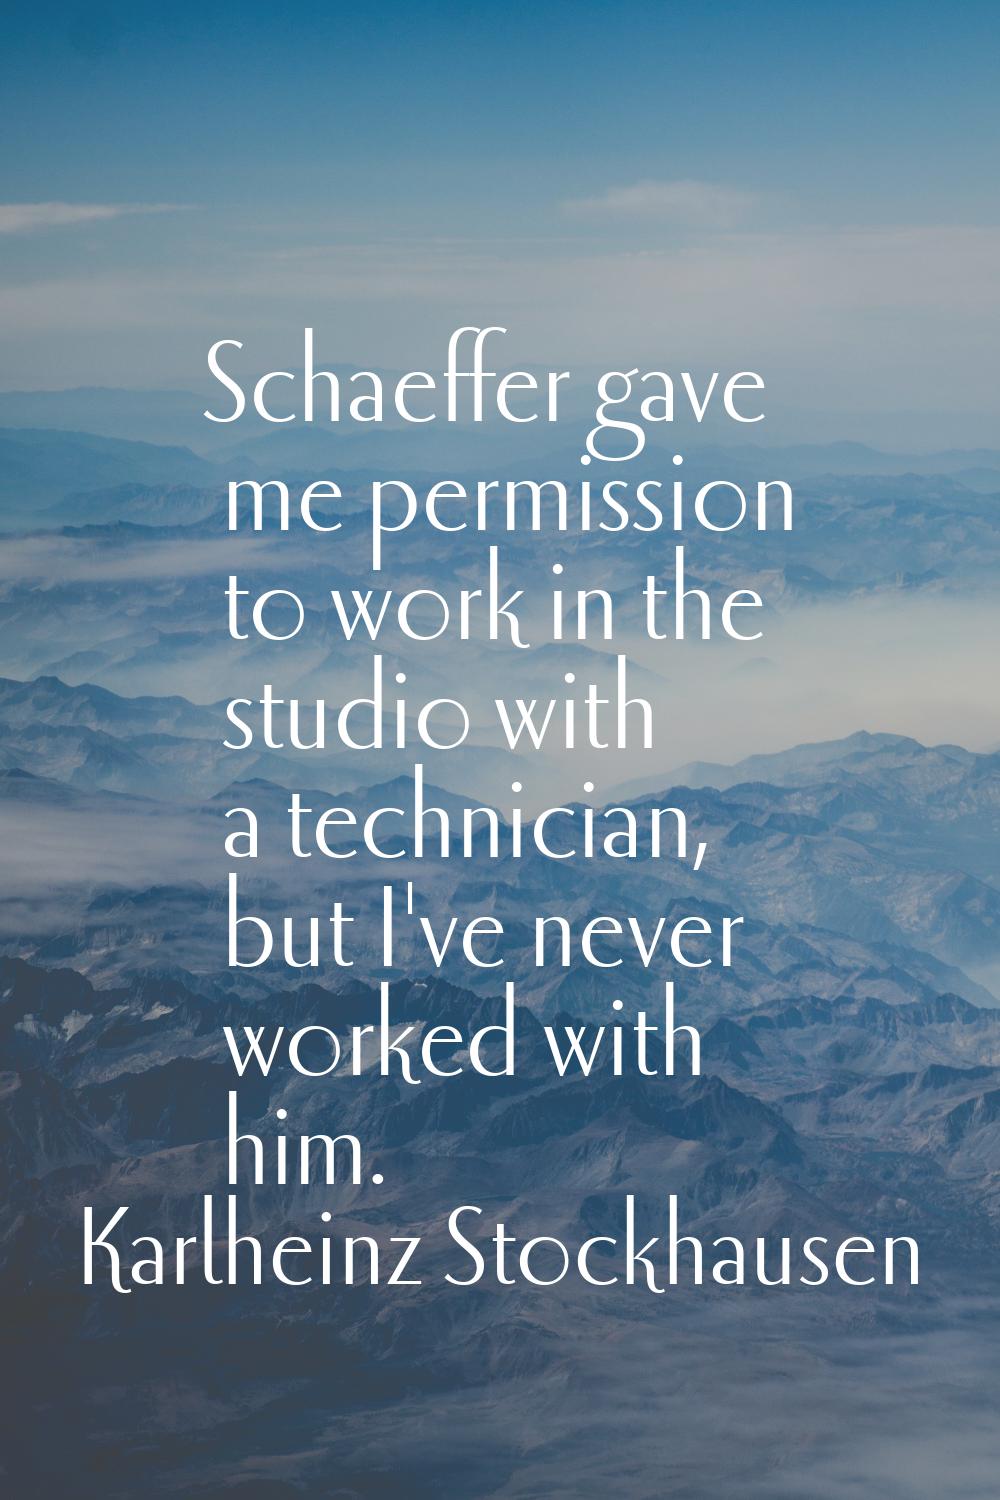 Schaeffer gave me permission to work in the studio with a technician, but I've never worked with hi